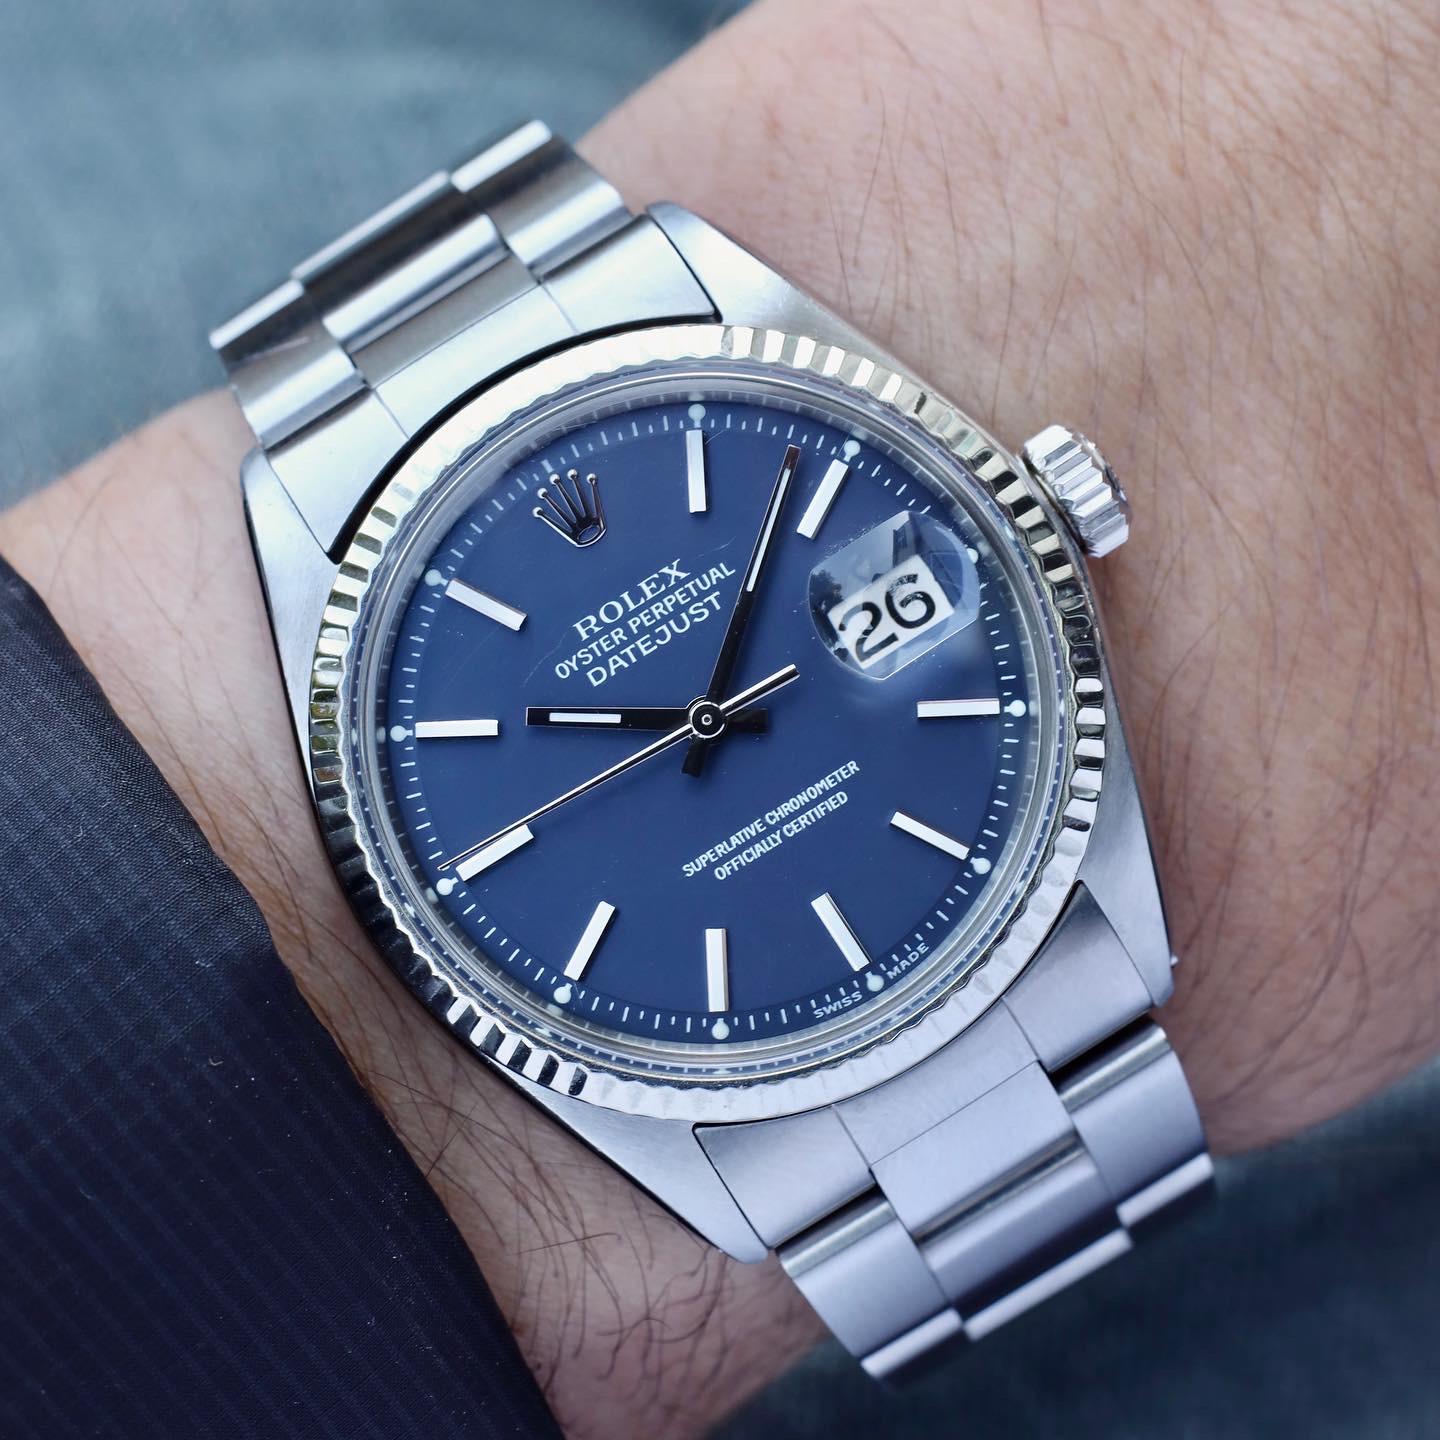 WTS] Rolex Datejust 16030 Blue dial - $4,199 shipped. | WatchCharts